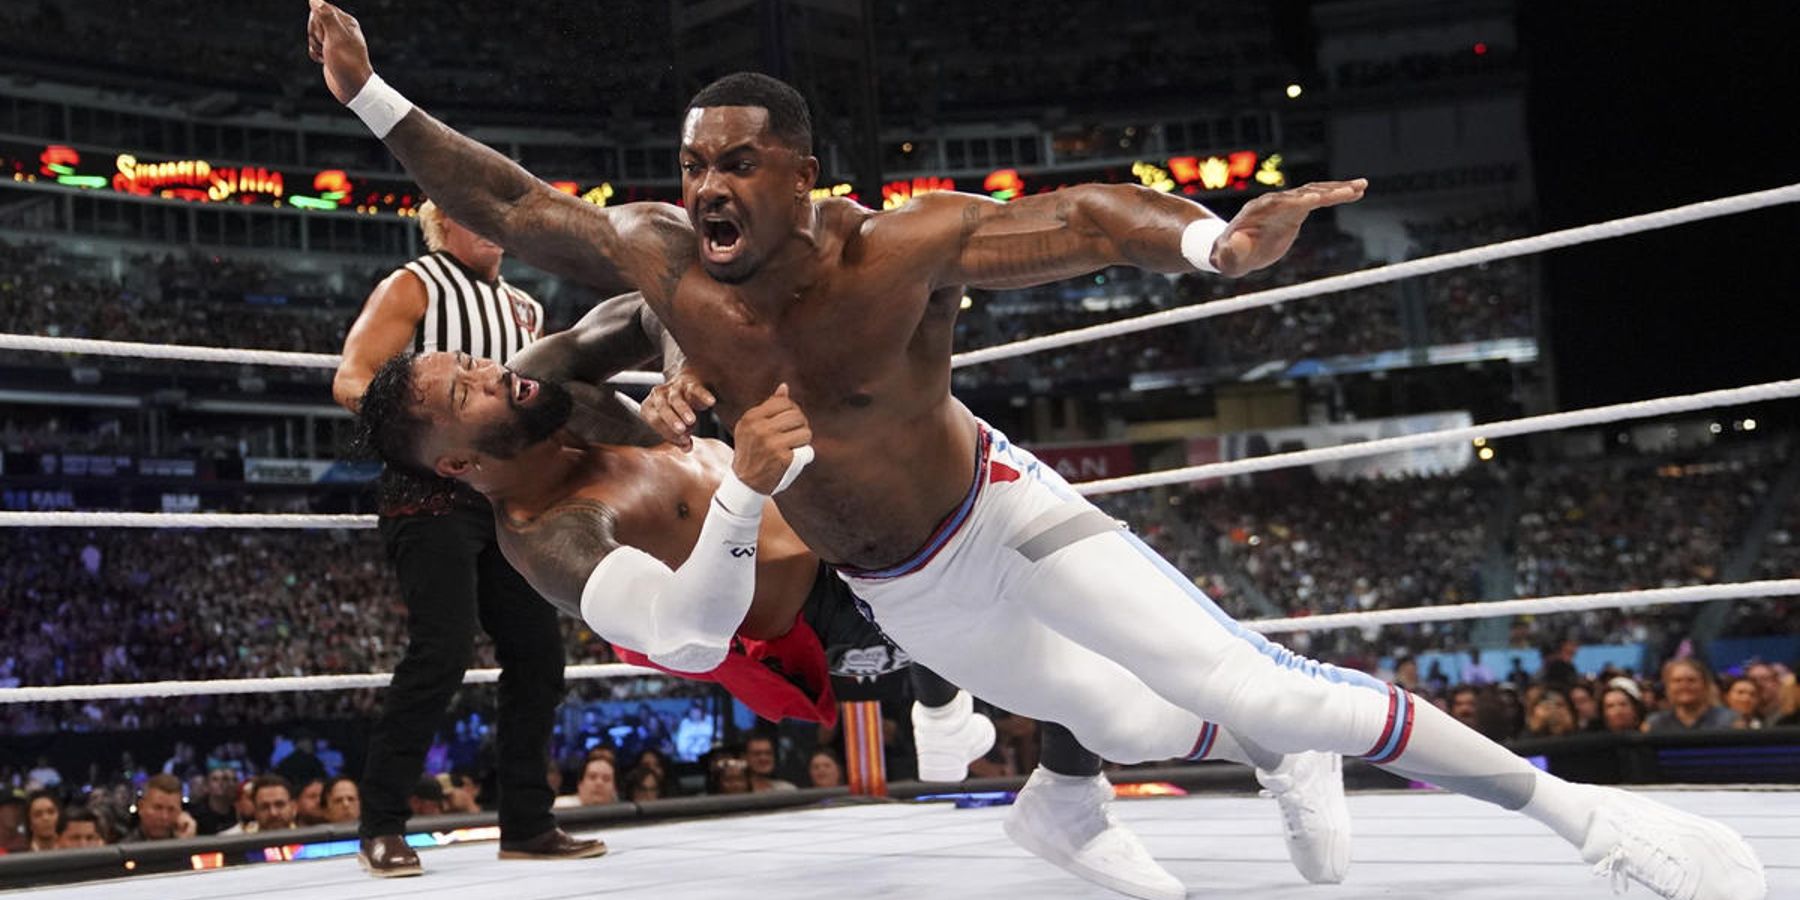 Montez Ford waylays his opponent during a match at WWE SummerSlam in 2022.